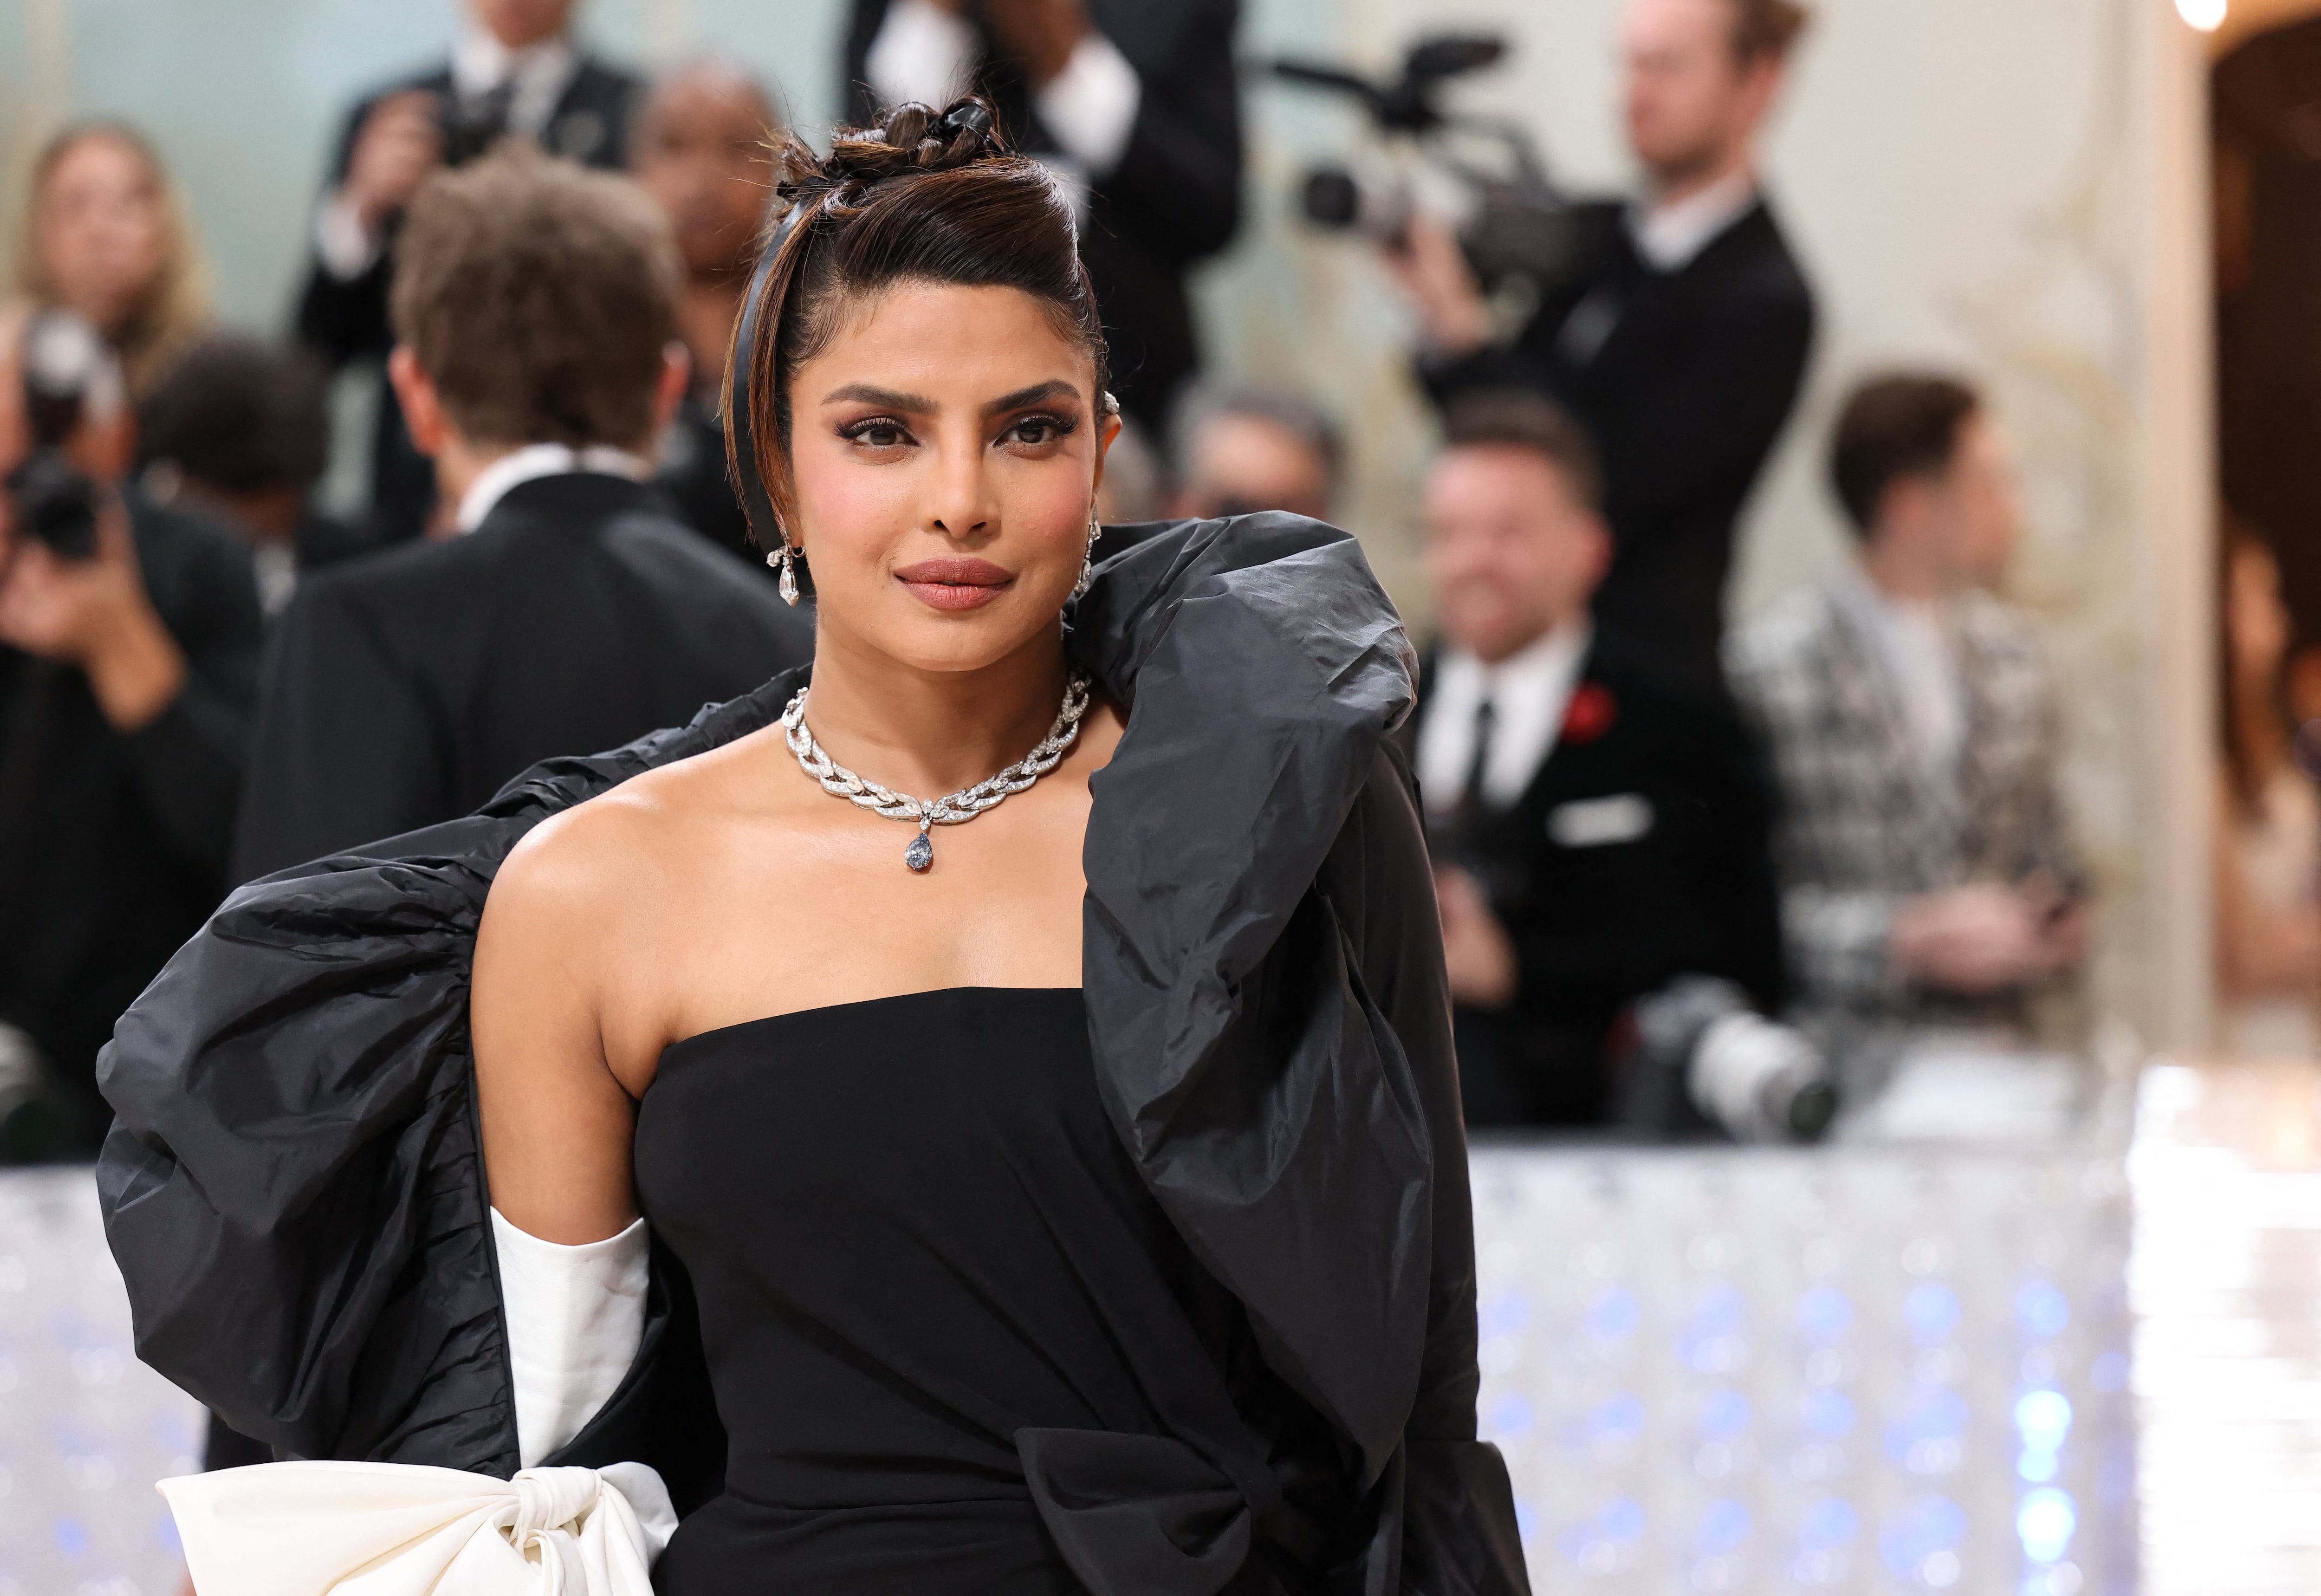 Priyanka Chopra Jonas poses at the Met Gala, an annual fundraising gala held for the benefit of the Metropolitan Museum of Art's Costume Institute with this year's theme "Karl Lagerfeld: A Line of Beauty", in New York City, New York, U.S., May 1, 2023. REUTERS/Andrew Kelly